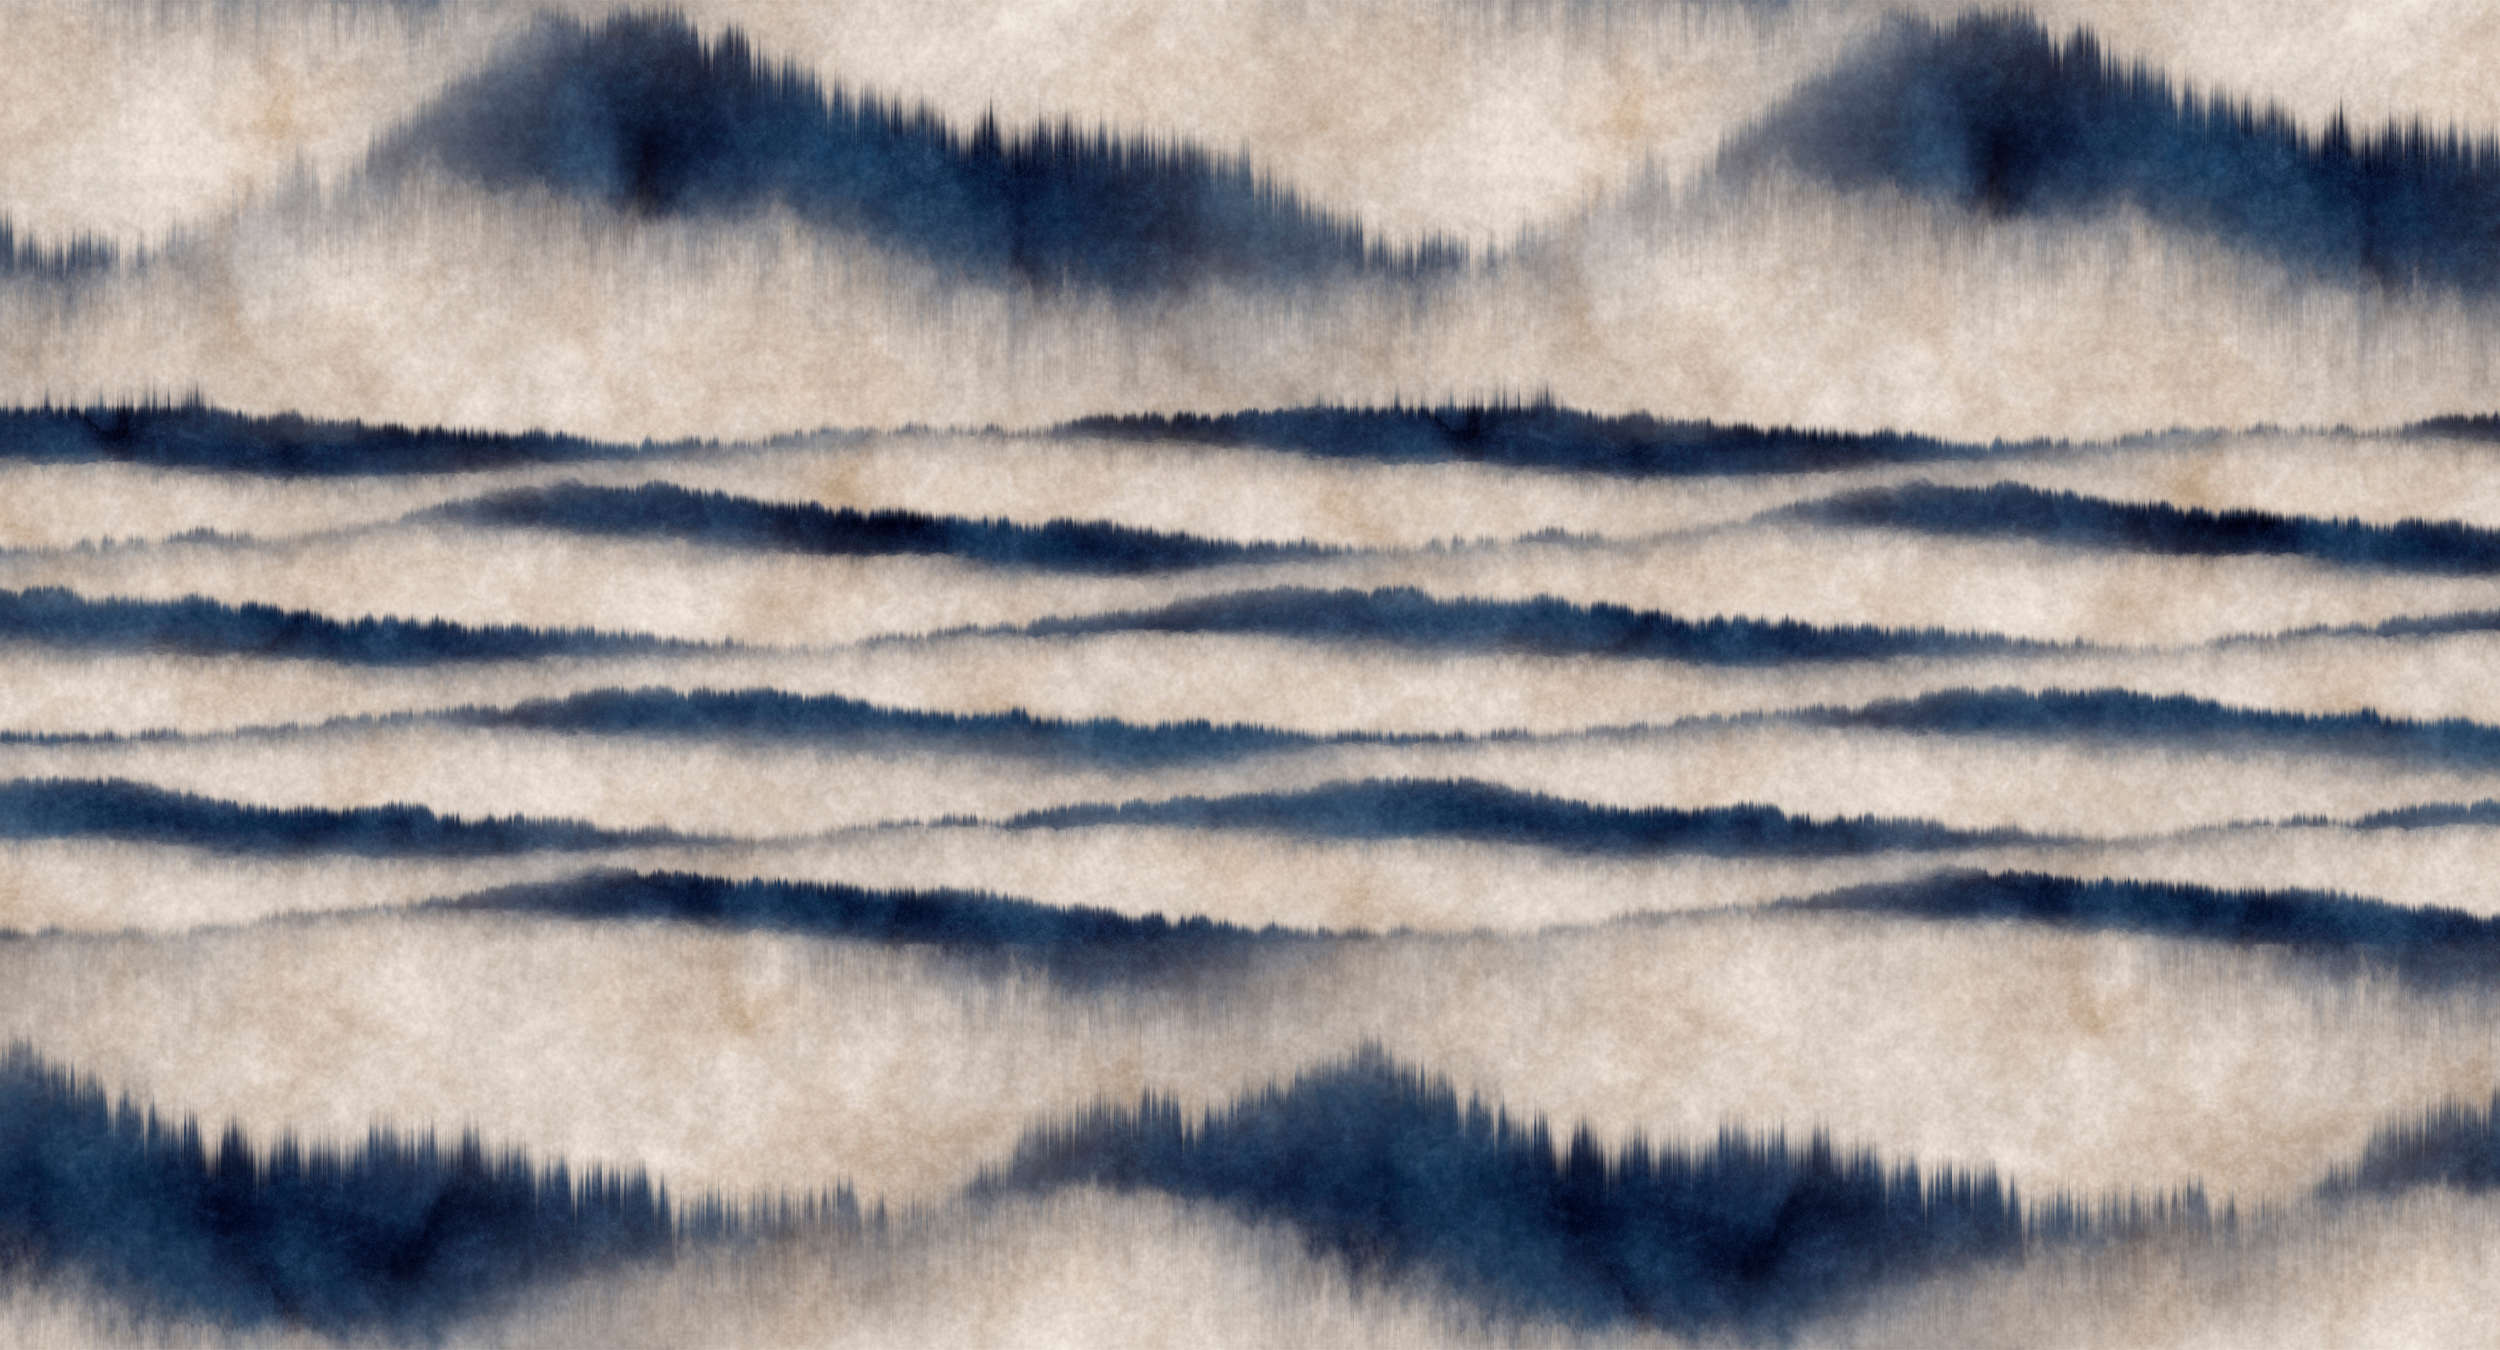             Photo wallpaper abstract pattern waves - blue, white
        